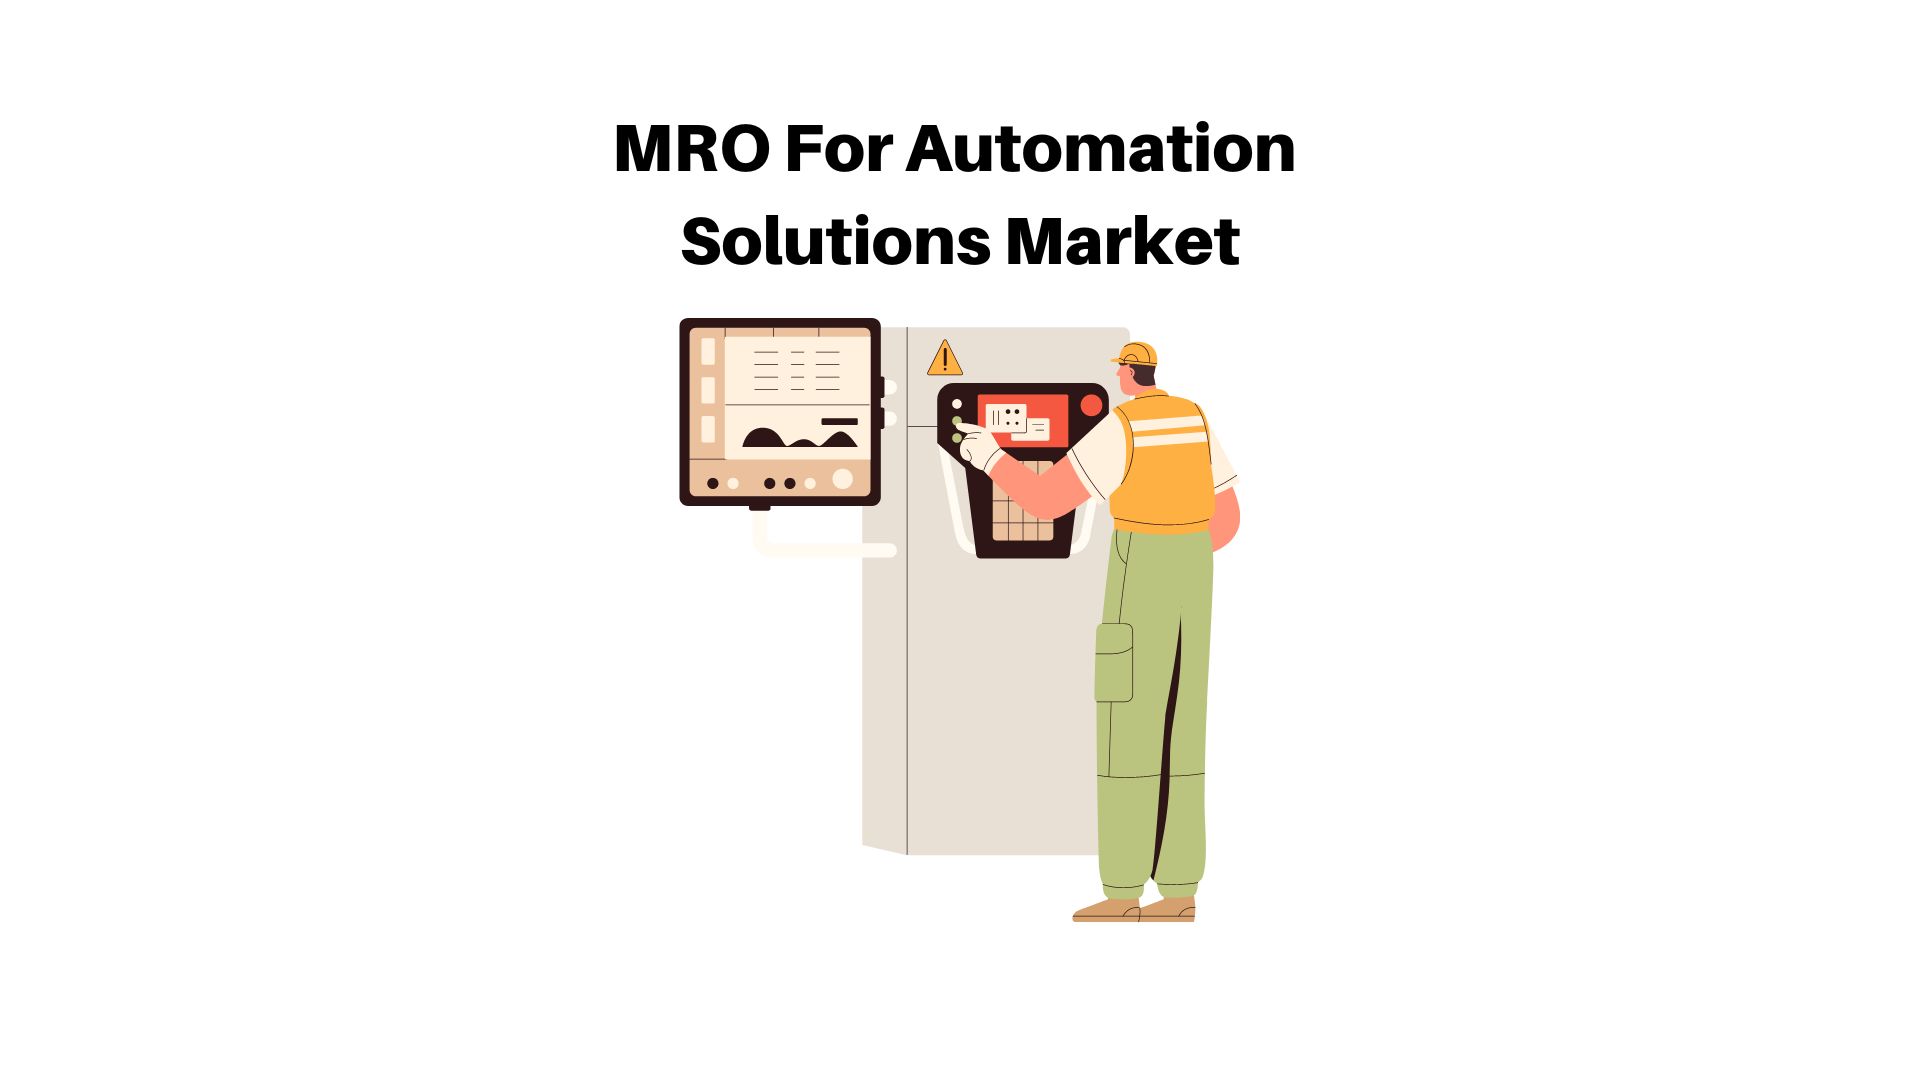 MRO For Automation Solutions Market to Reach USD 87.77 Billion by 2032, Says Market.us Research Study